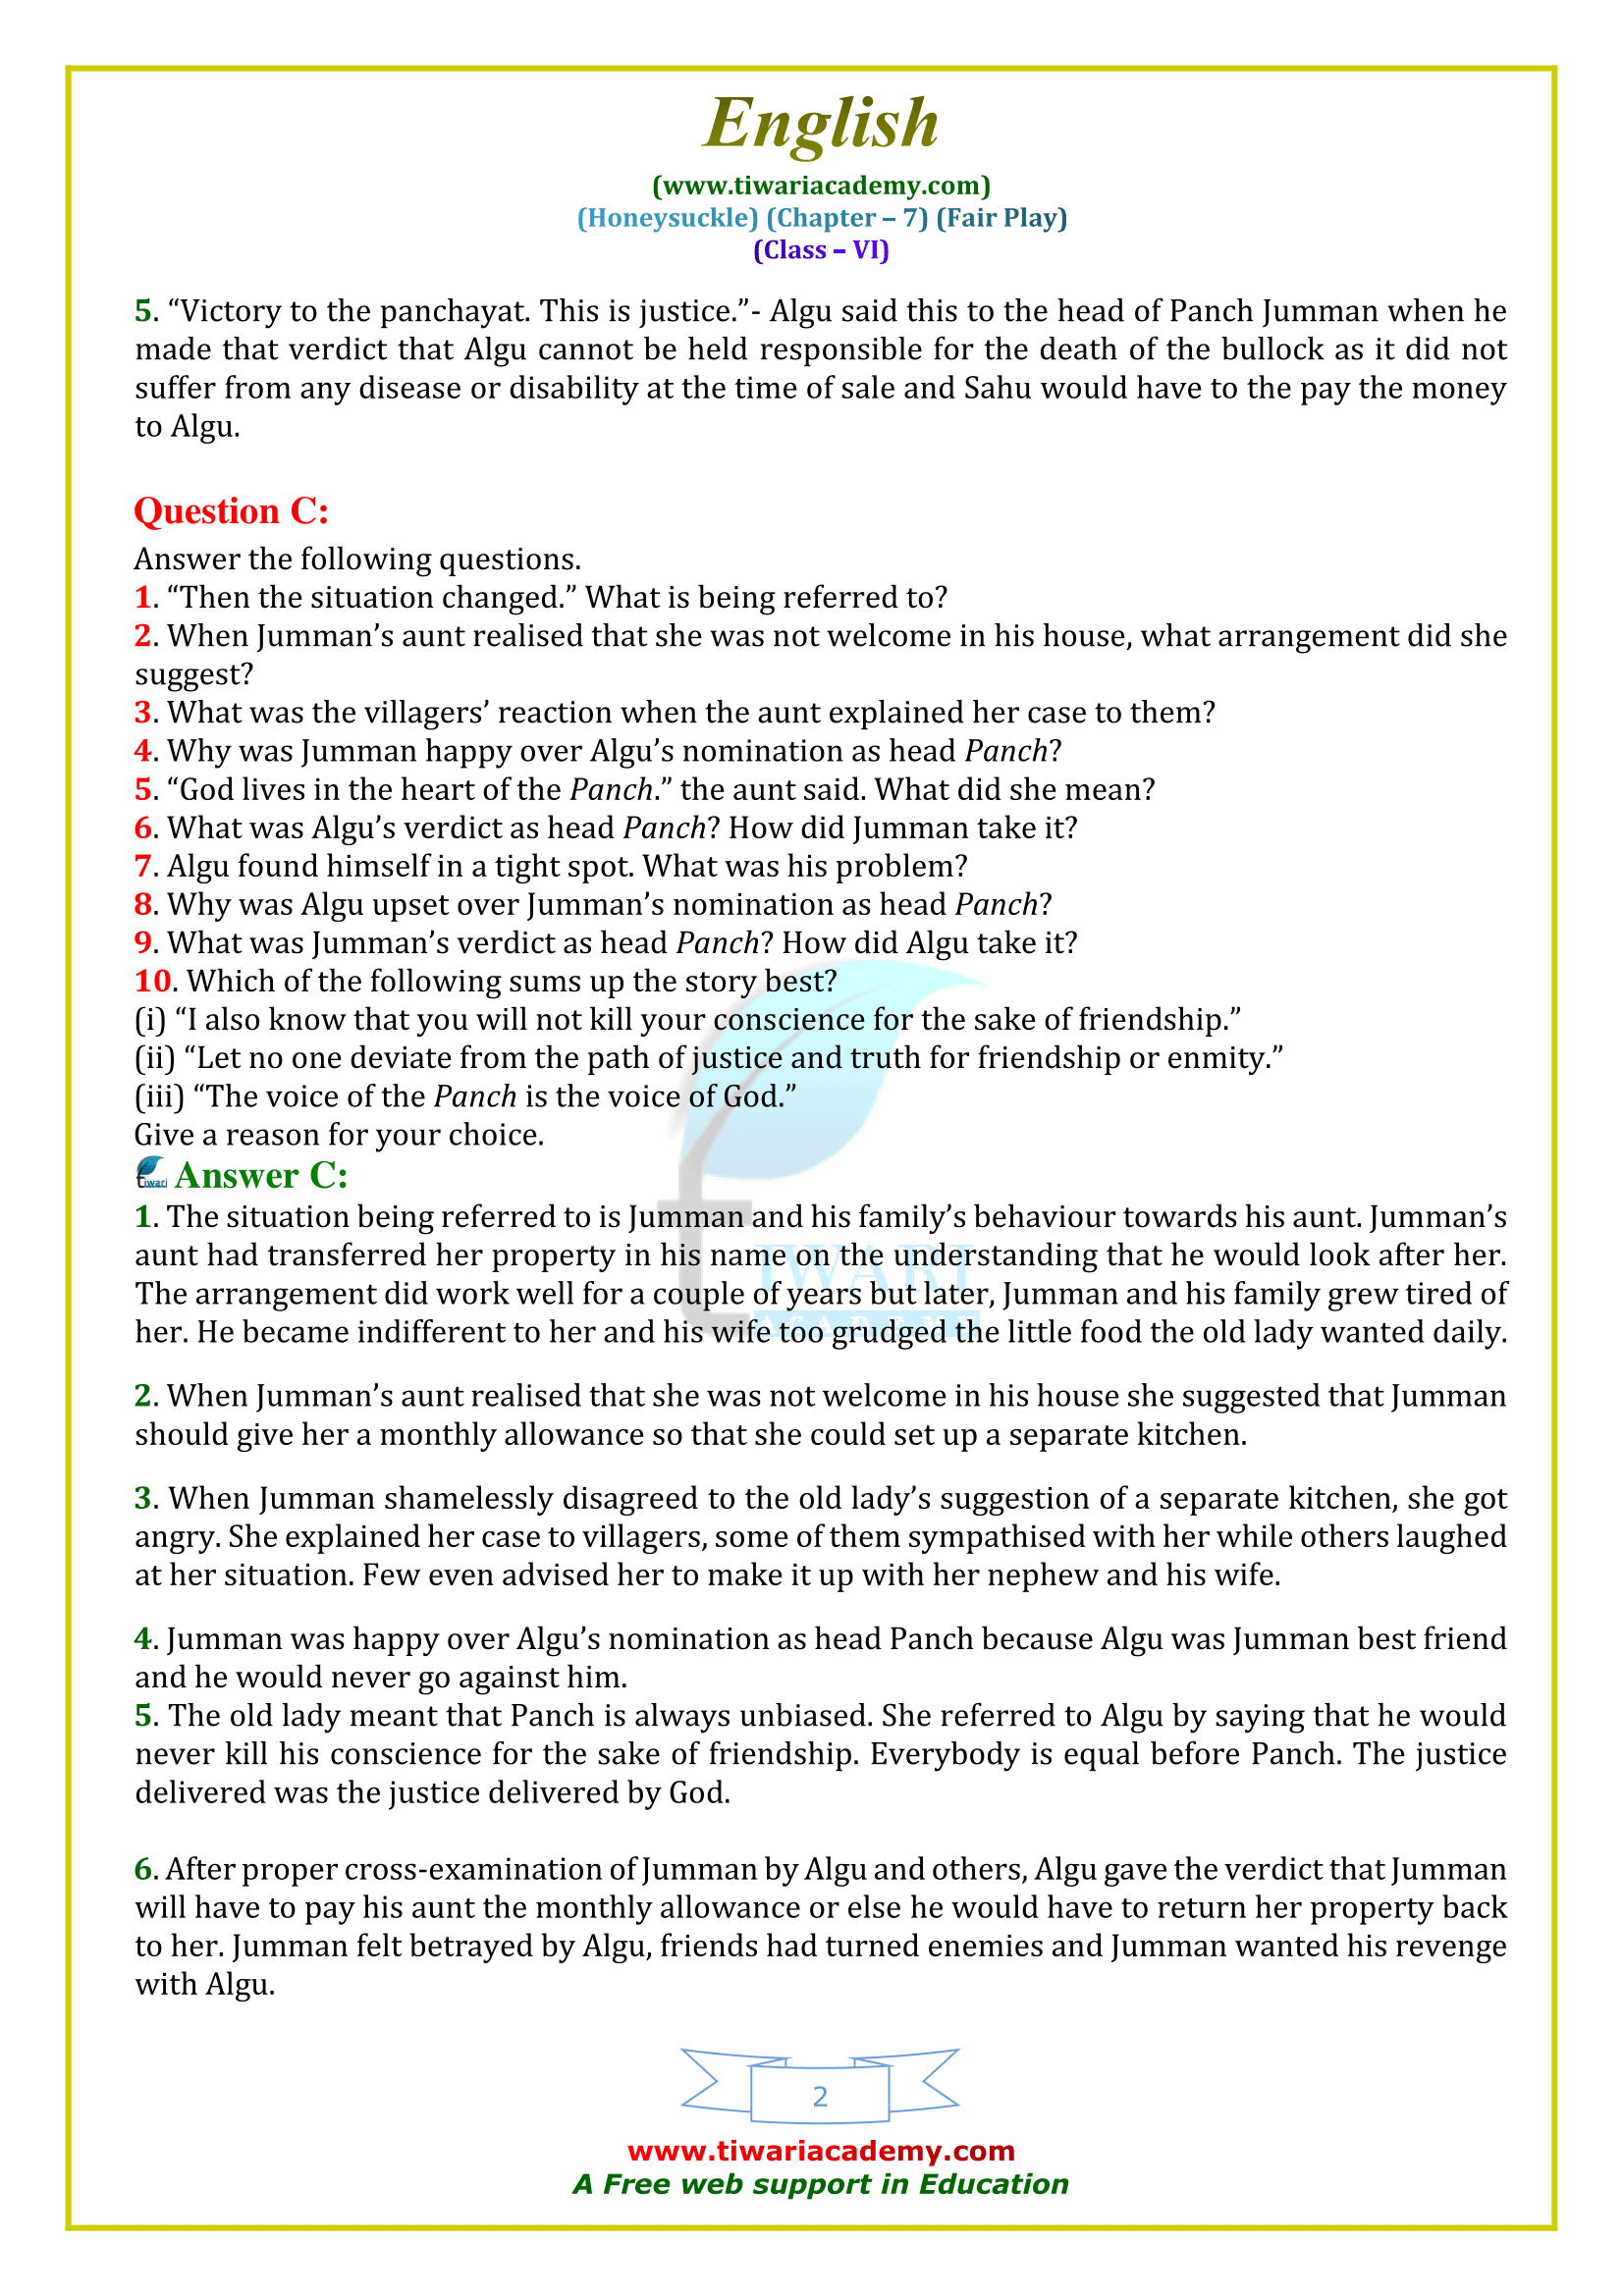 NCERT Solutions for Class 6 English Honeysuckle Chapter 7 in PDF